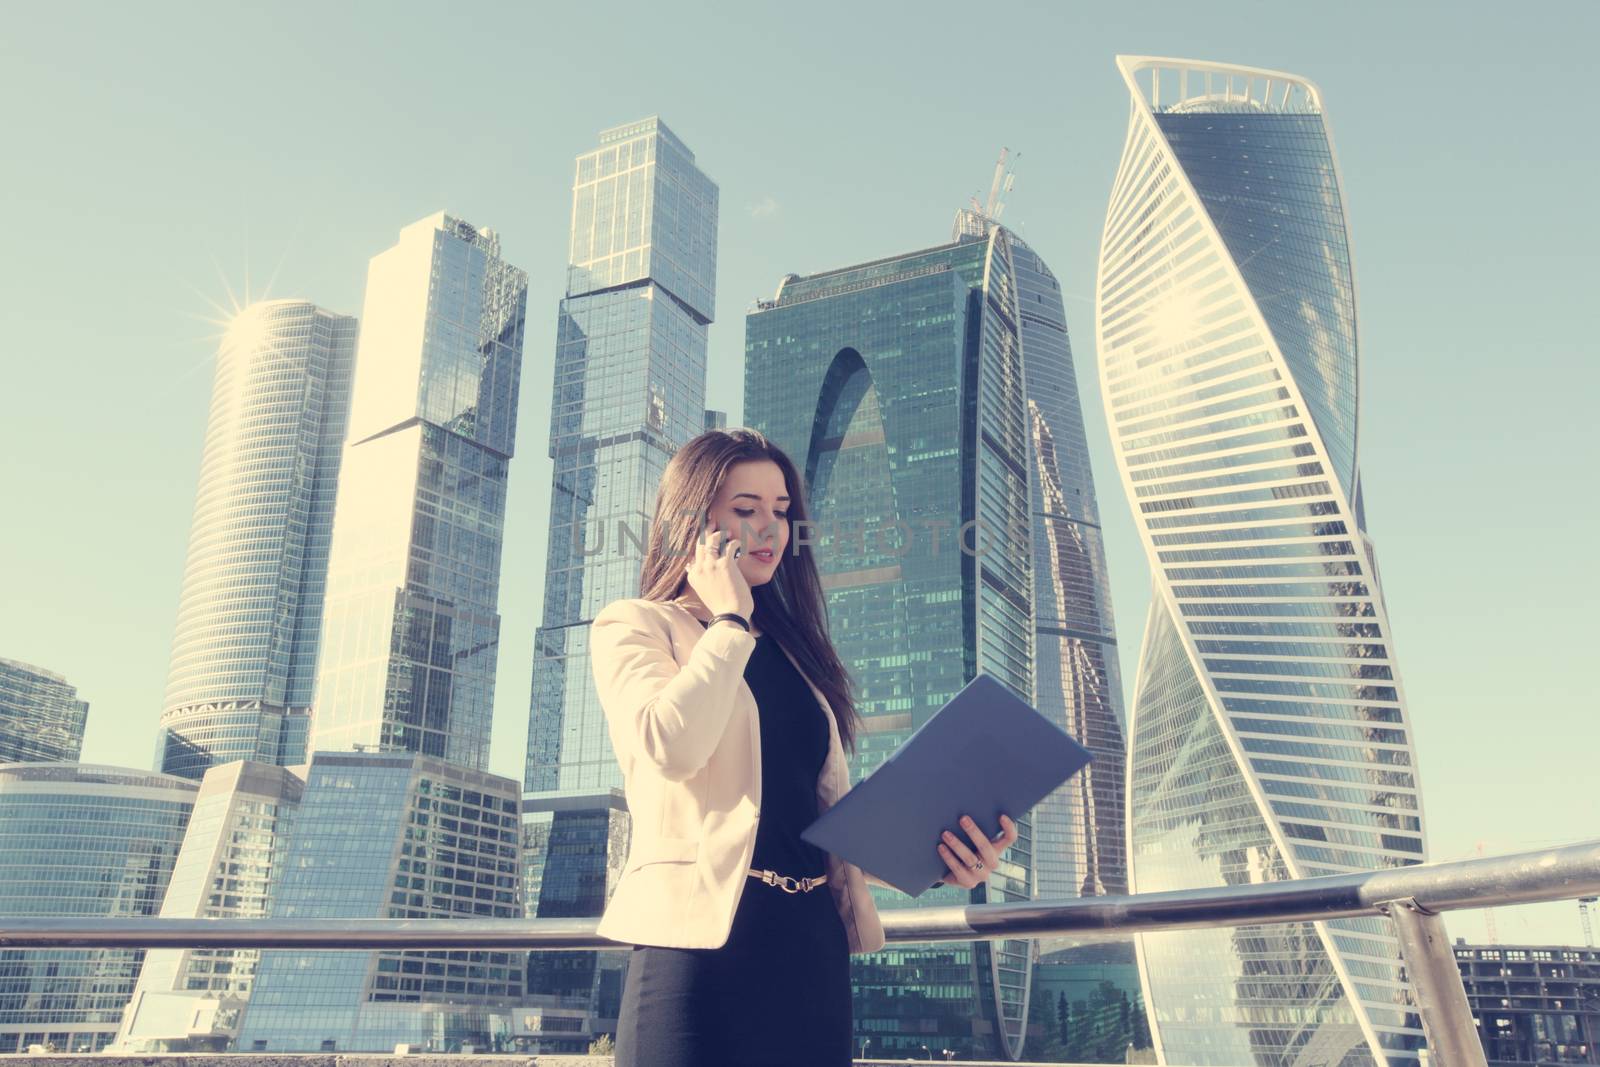 Businesswoman at skyscraper background by ALotOfPeople